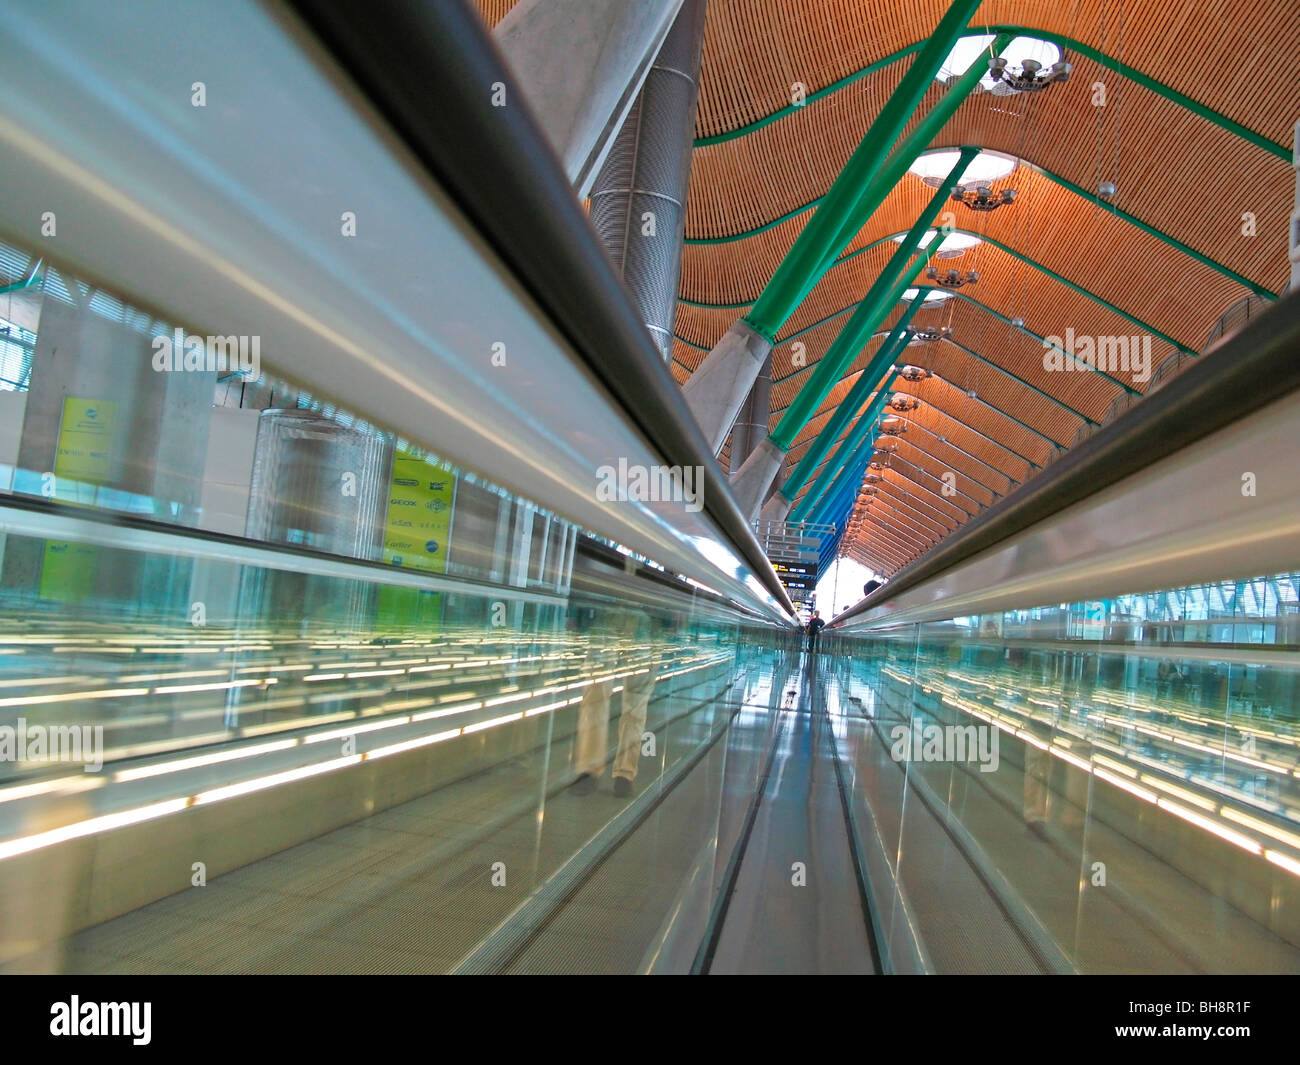 People mover Madrid Barajas International Airport Interior  reflections abstract Stock Photo